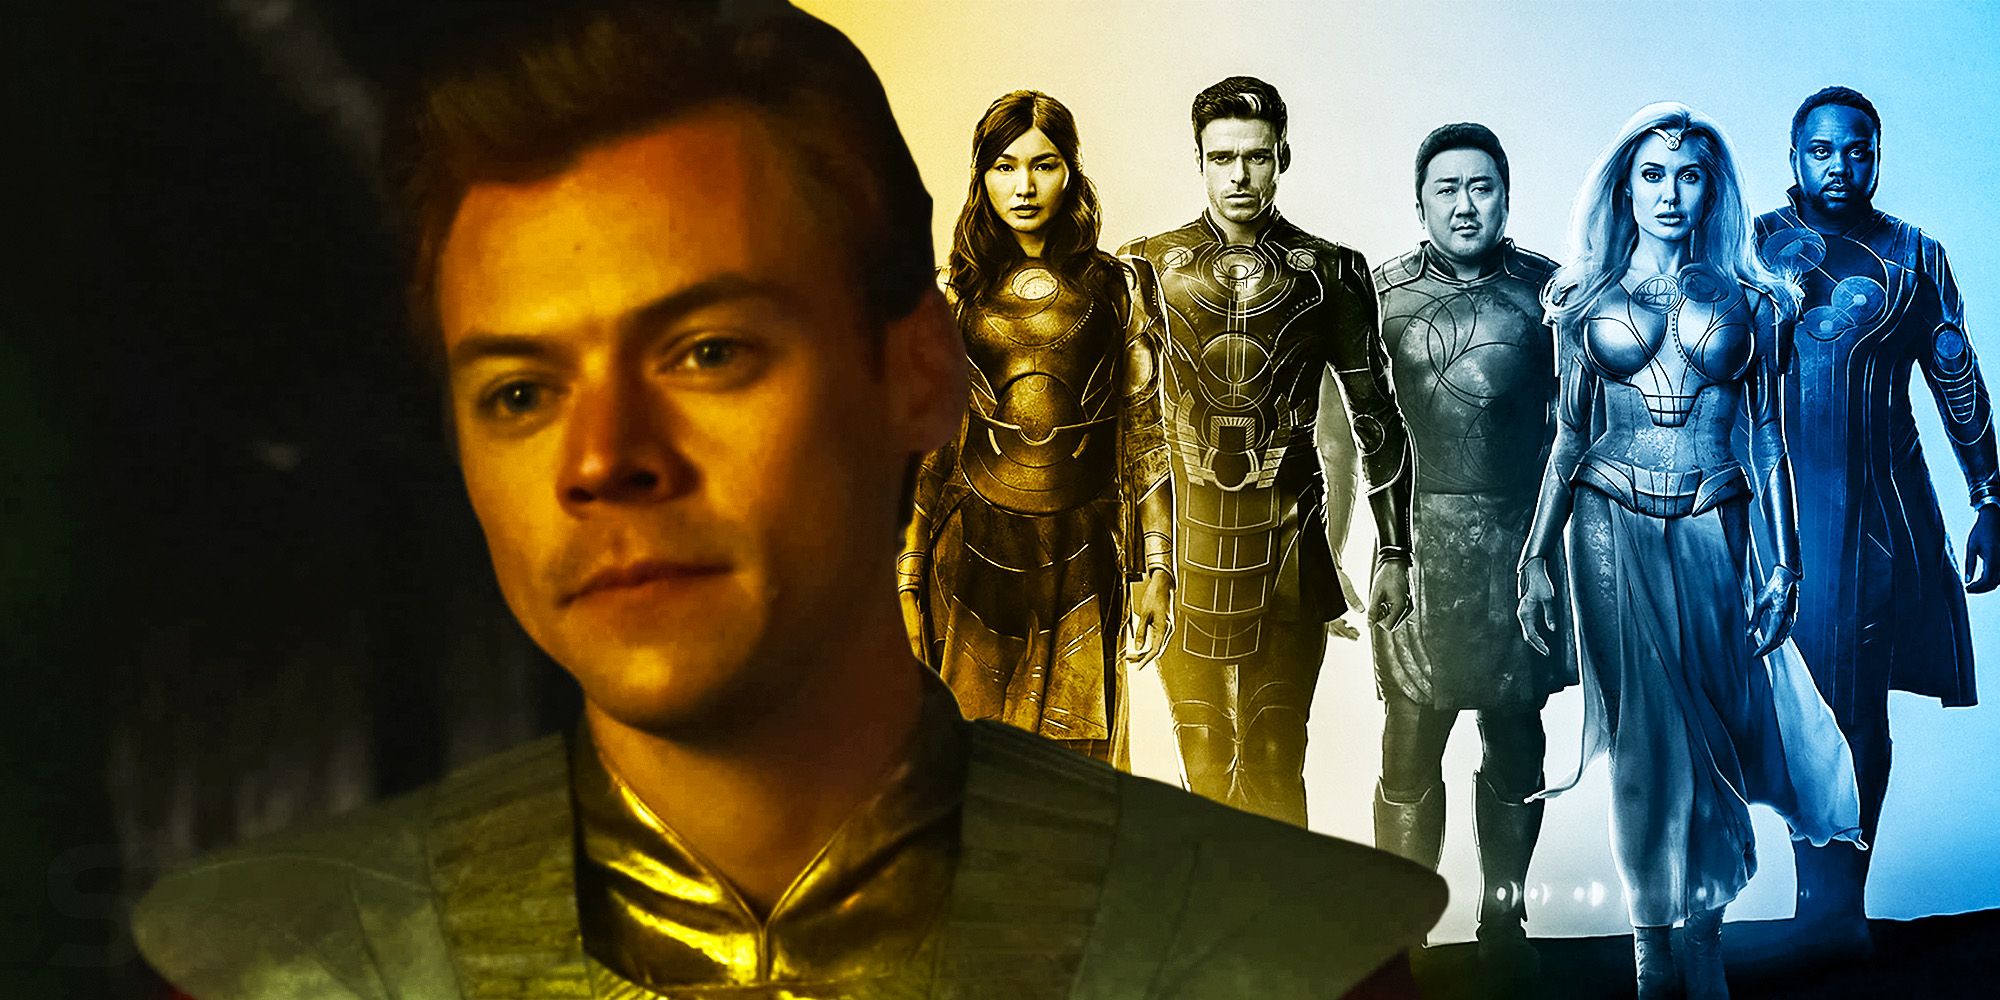 Harry Styles: Marvel's Starfox Return Might Not Happen for A While